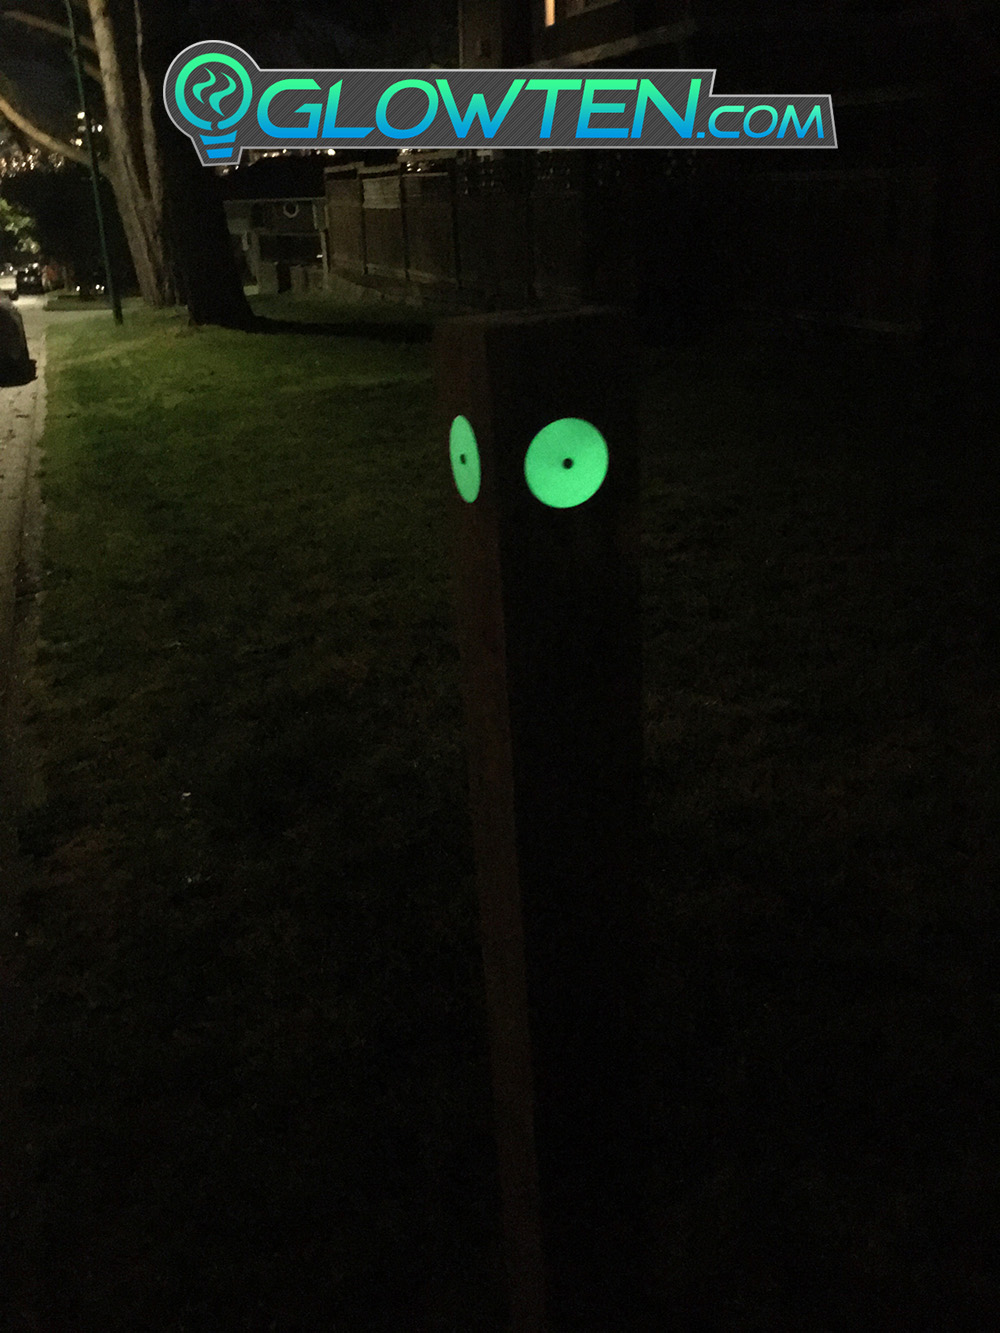 GLOWTEN.com - Emitting Green Glow Photo Luminescent Vinyl Round Point Circle Glow In The Dark Sign Light Guide Eco Friendly Traffic Marker Photoluminescent Aluminum Body Material, Any Poles picture photo cap preview pic image search 4